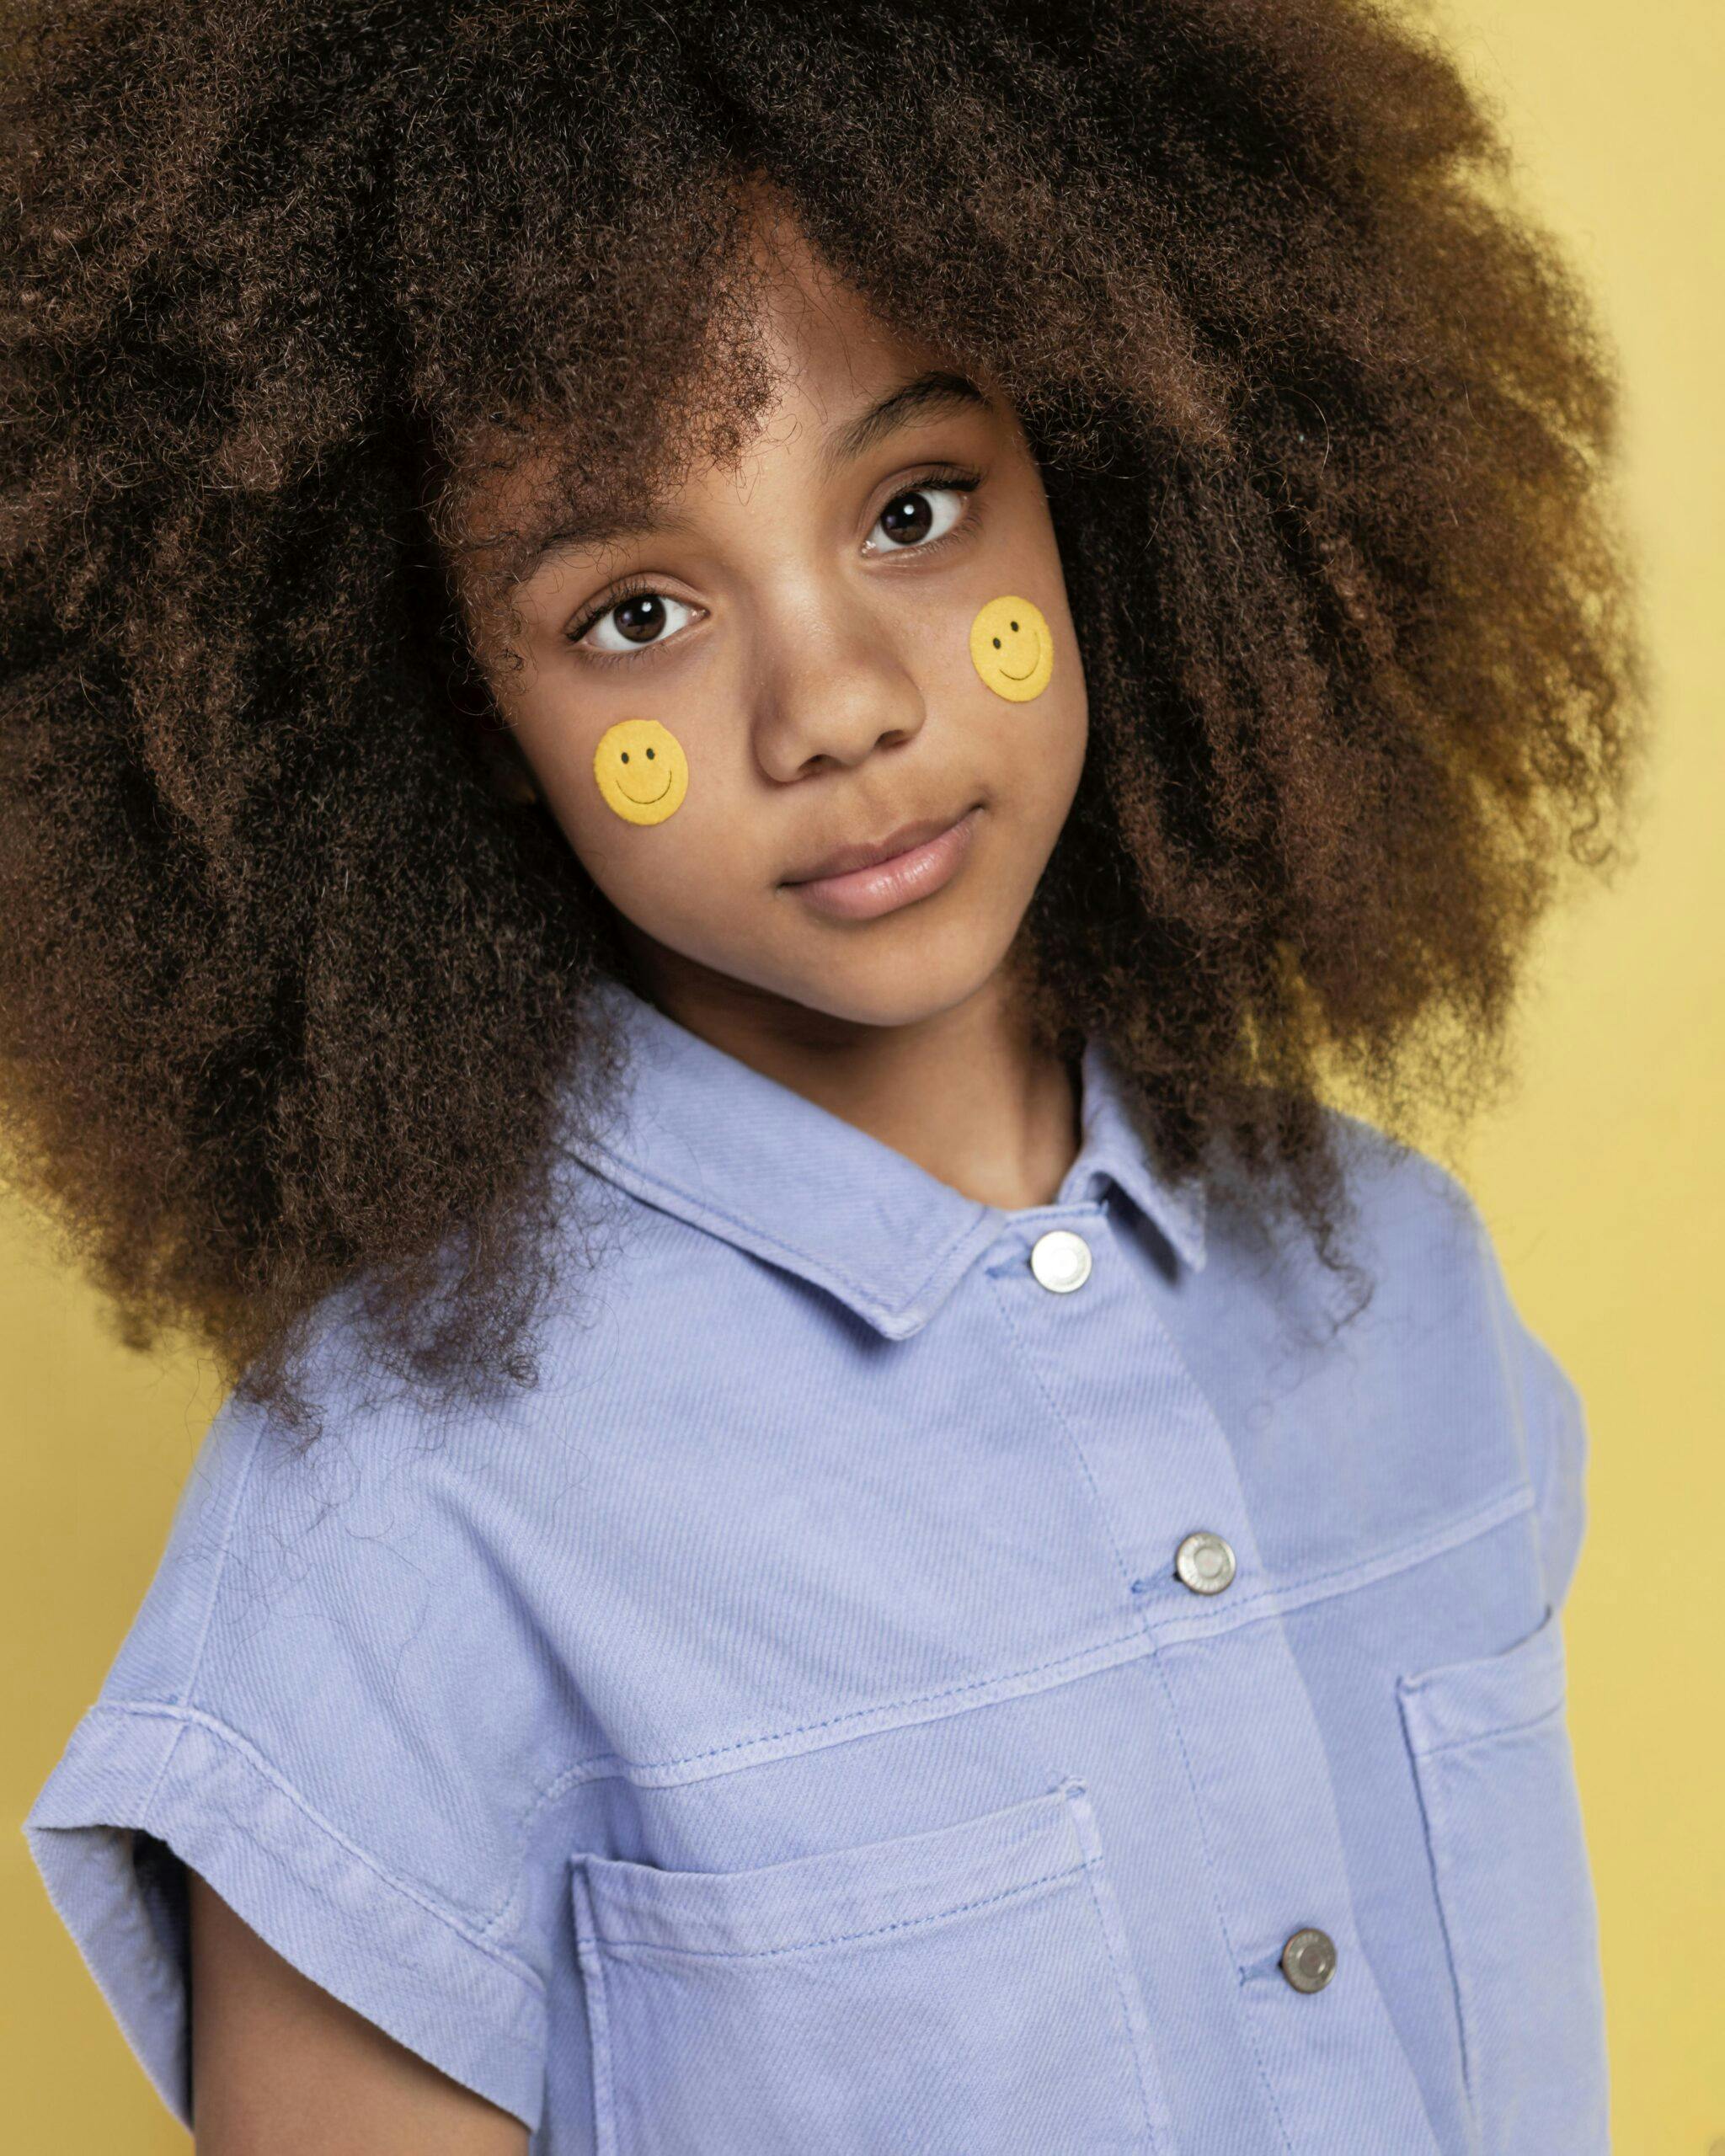 portrait-young-adorable-girl-posing-with-emoji-stickers-her-face